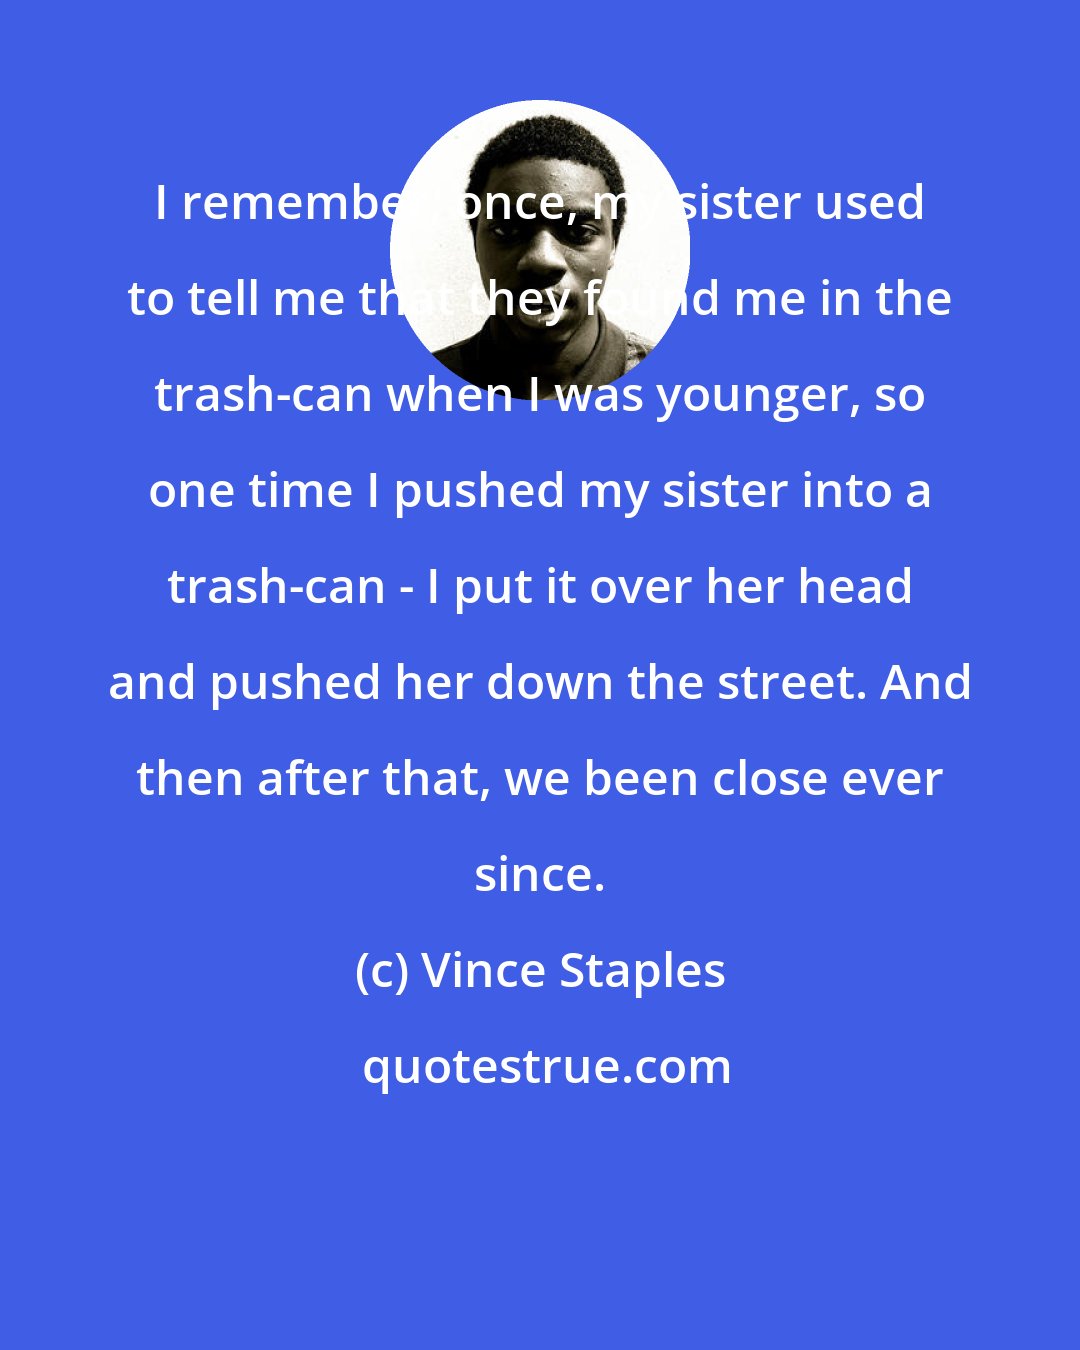 Vince Staples: I remember, once, my sister used to tell me that they found me in the trash-can when I was younger, so one time I pushed my sister into a trash-can - I put it over her head and pushed her down the street. And then after that, we been close ever since.